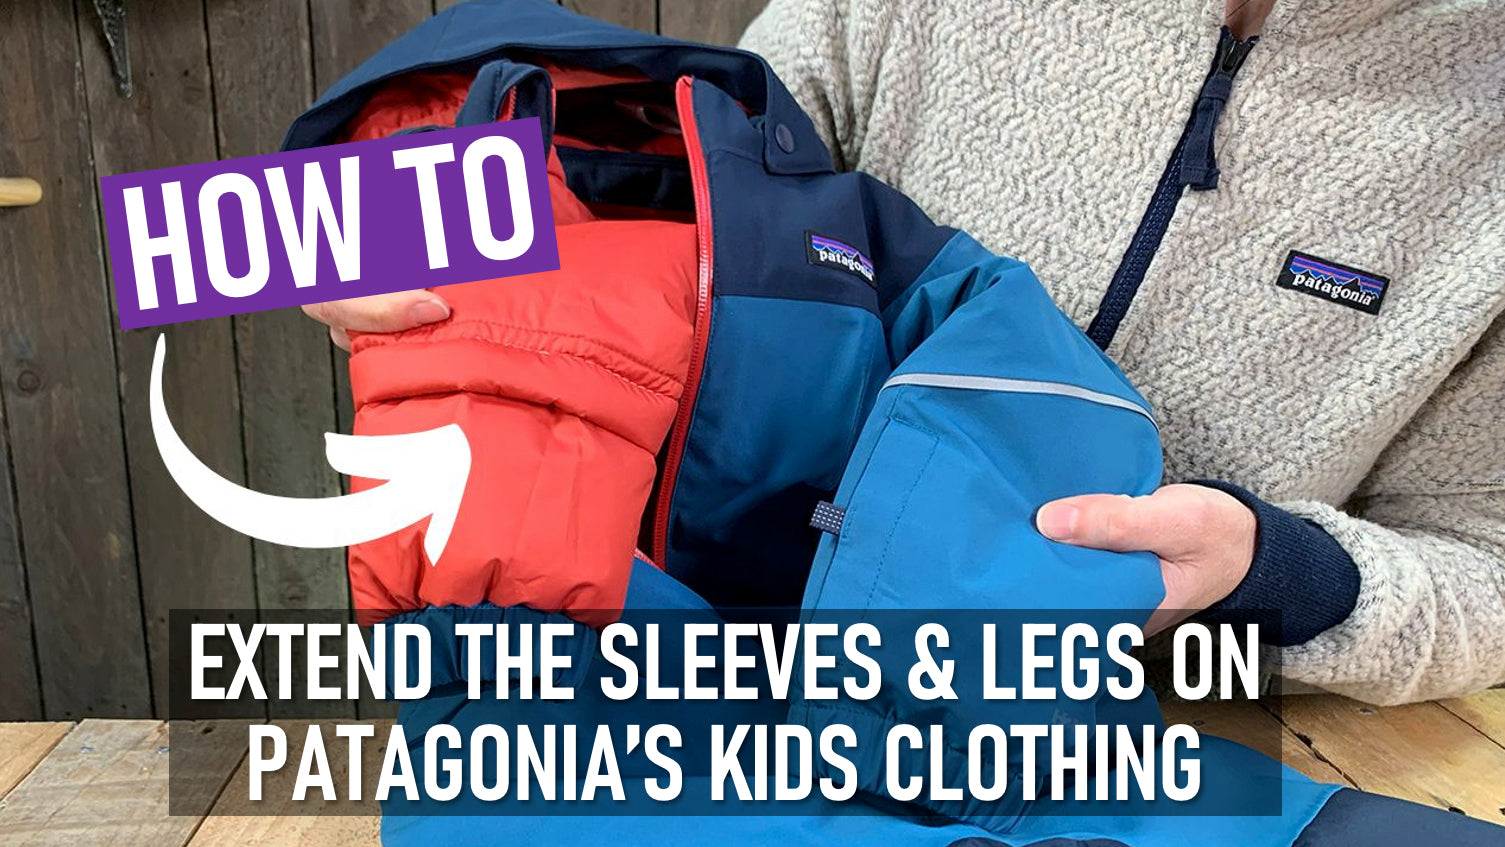 Patagonia Kids' Clothing: How To Extend The Length Of Arms and